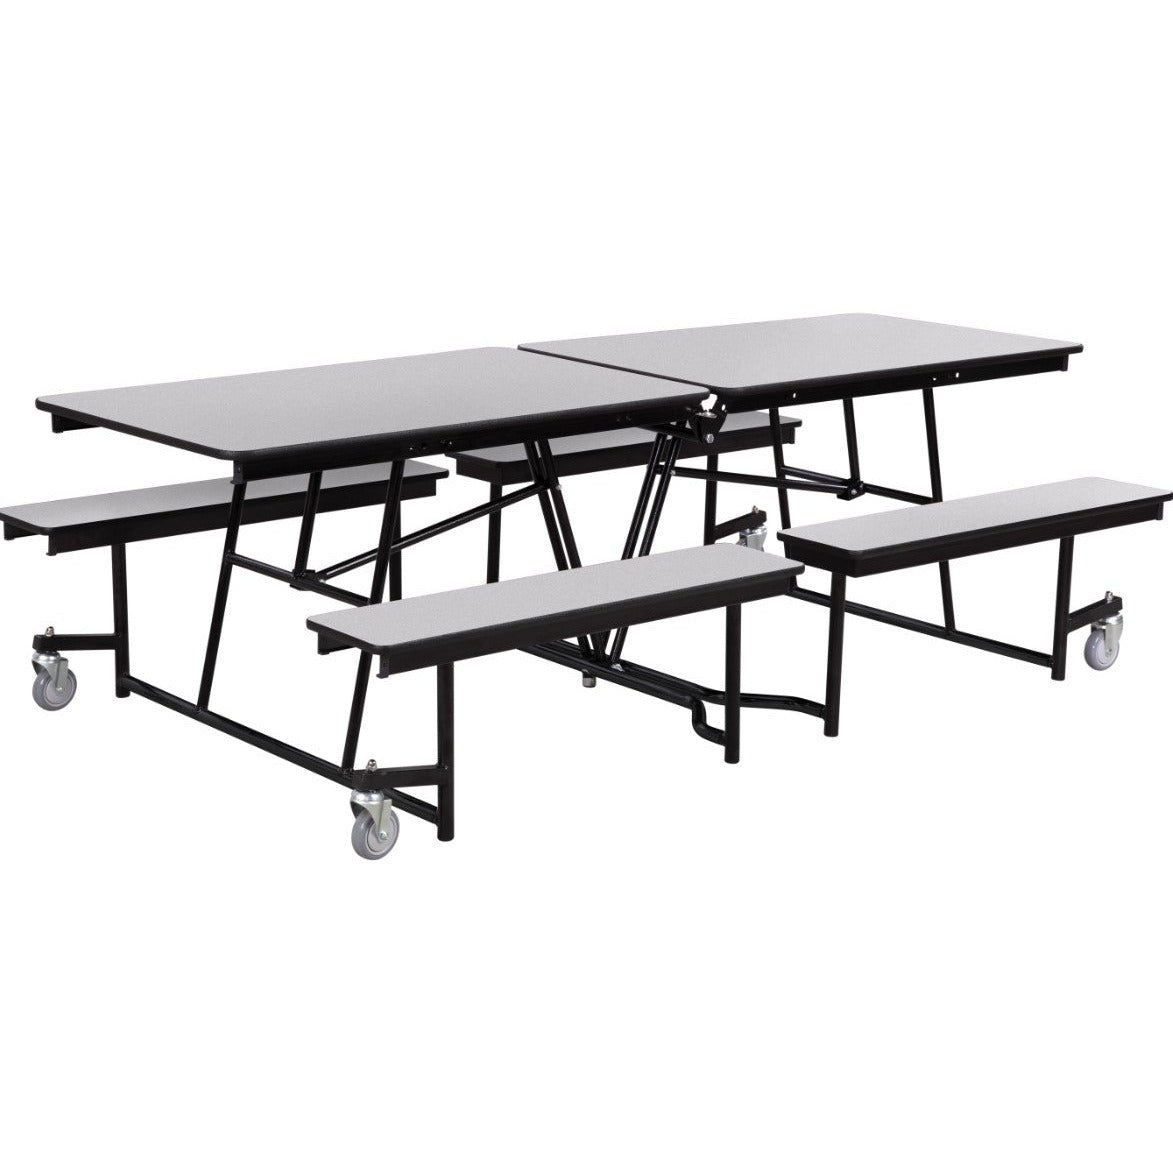 NPS Bench Cafeteria Table - 12' - MDF Core - ProtectEdge - Black Powdercoating Frame - Pearl Soapstone FINE VELVET TEXTURE FINISH Table Top - Asian Night SOFTGRAIN FINISH Bench